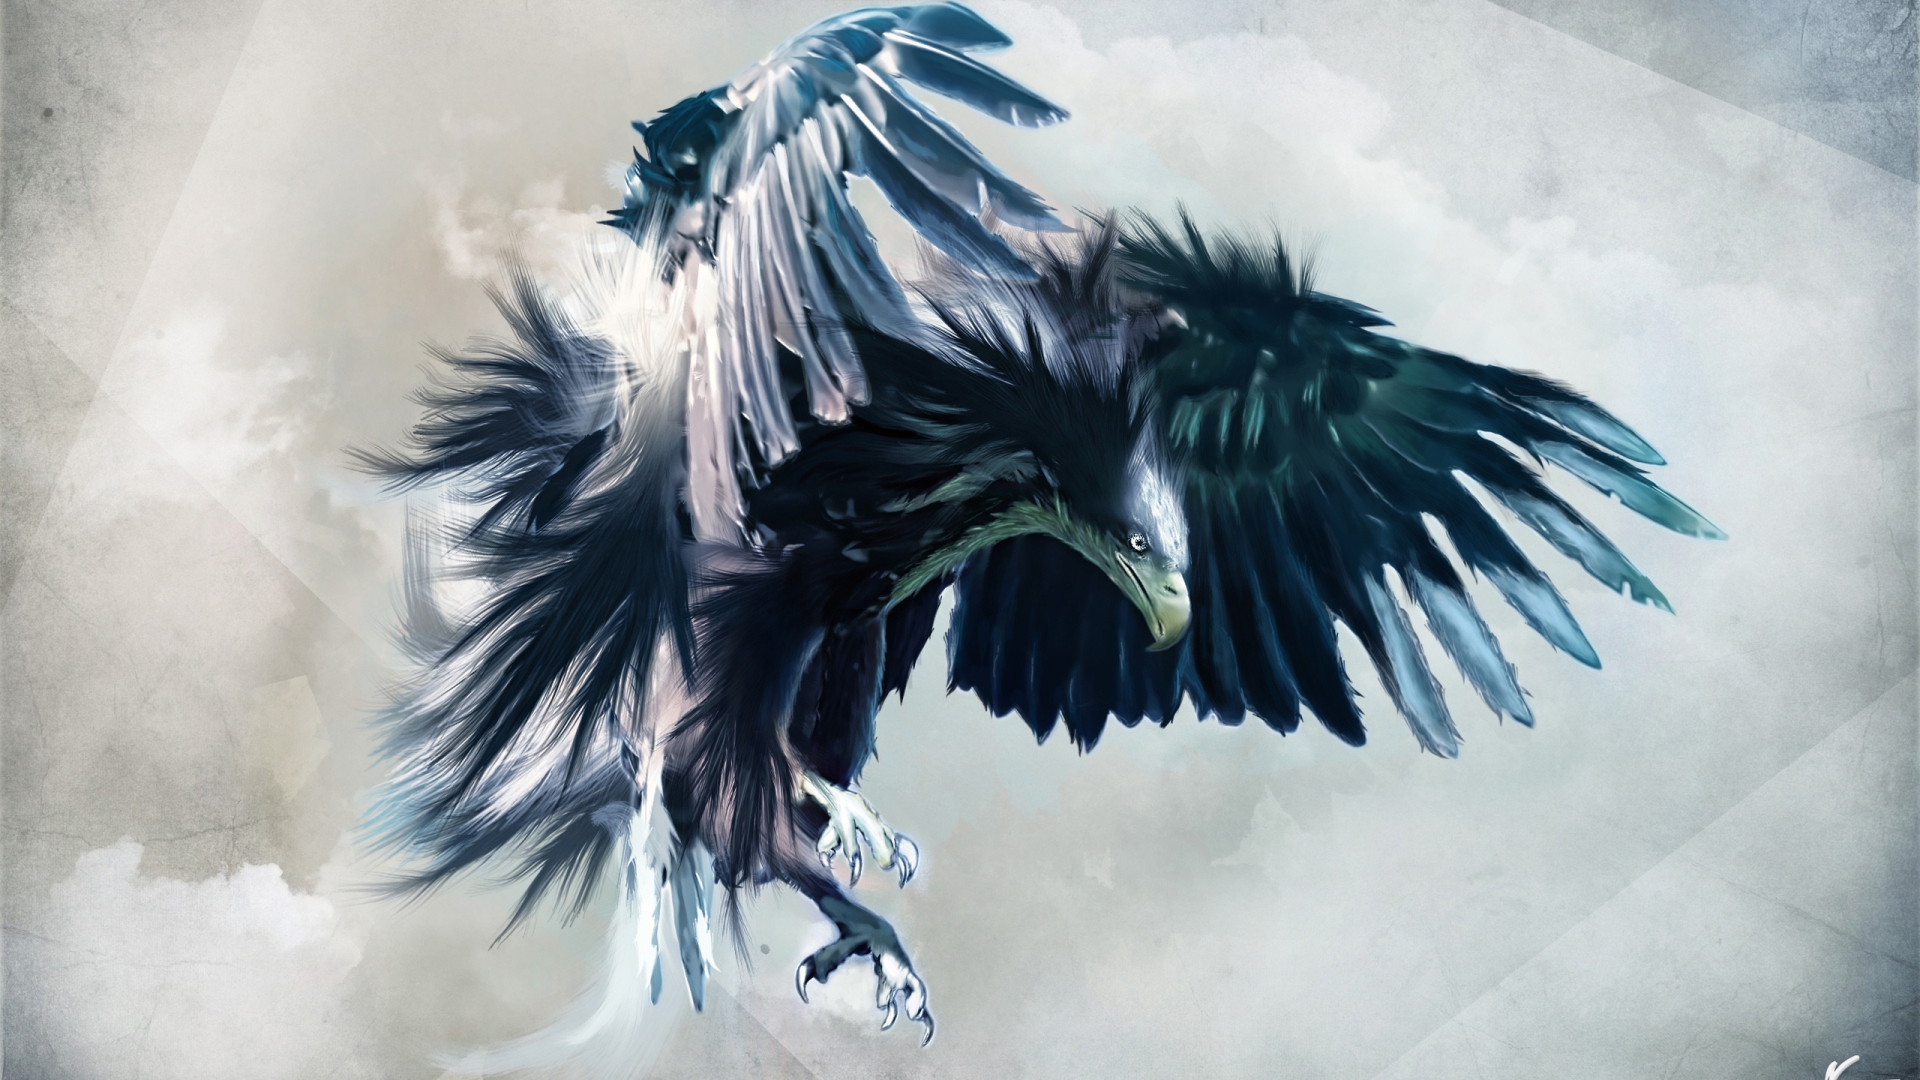 Amazing Eagle for 1920 x 1080 HDTV 1080p resolution